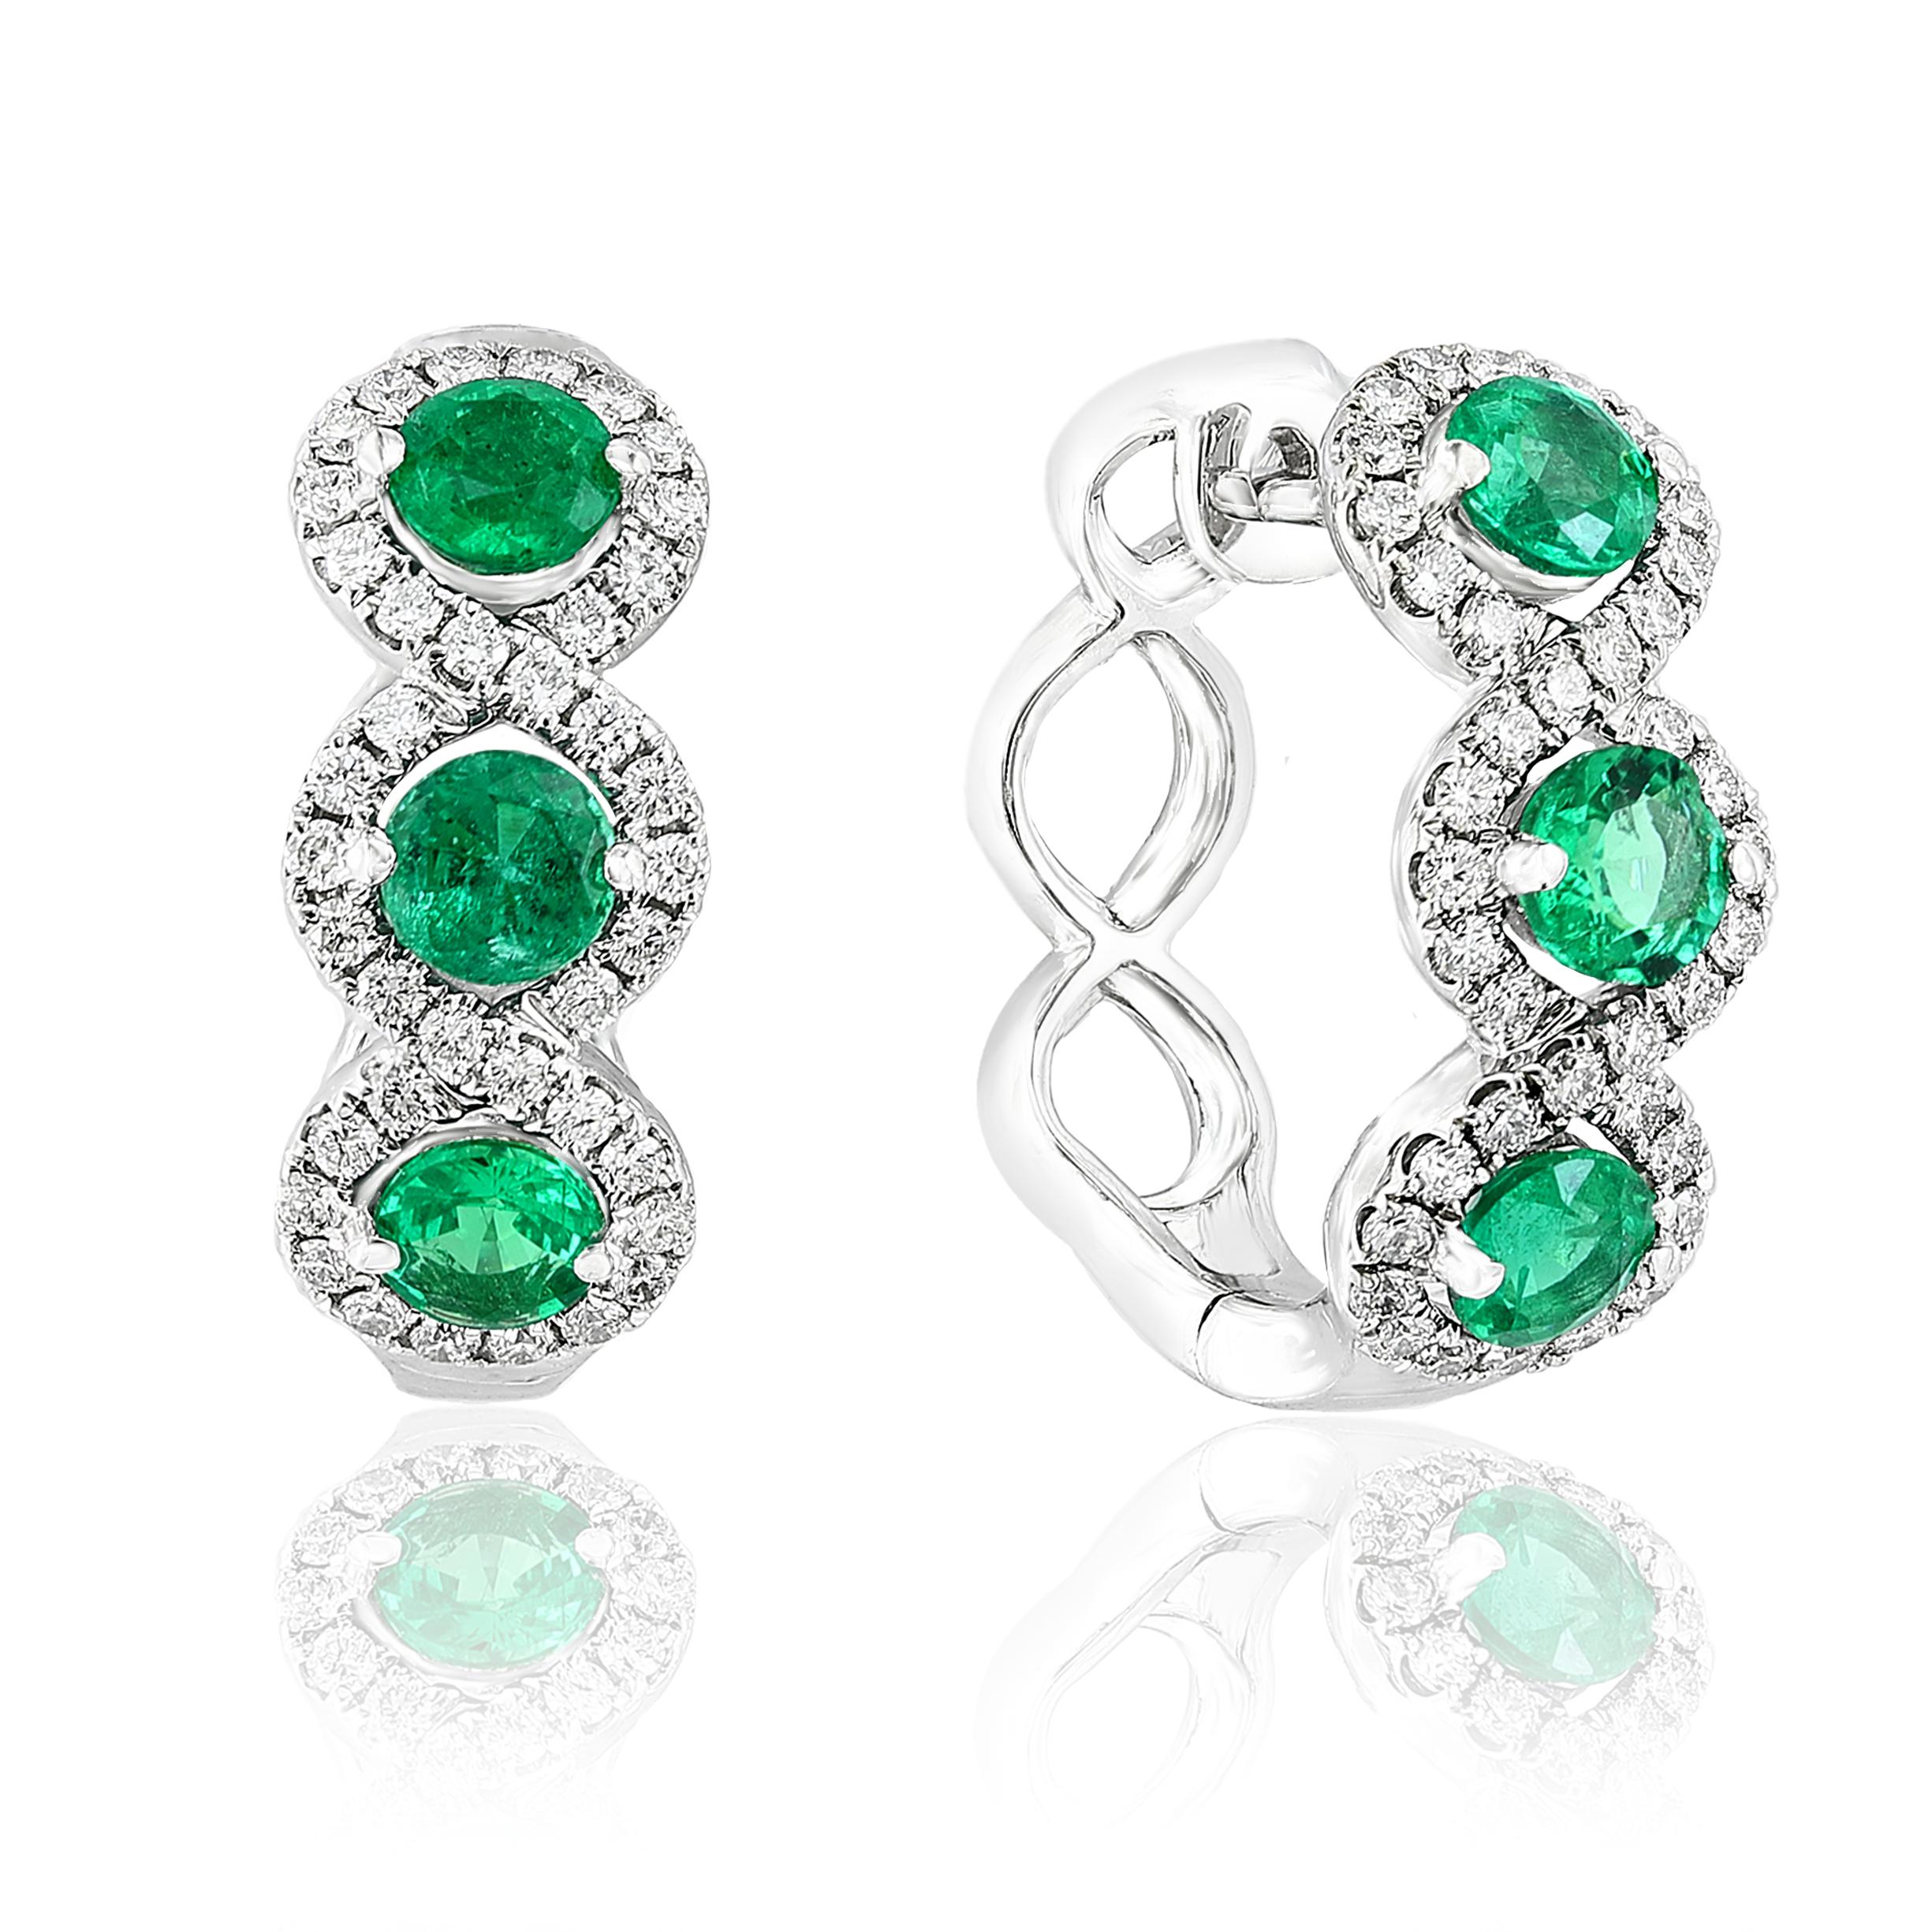 A chic and fashionable pair of hoop earrings showcasing brilliant-cut 6-round emeralds weigh 1.72 carats in total, set in 18k white gold.  76 Round diamonds surrounding the emaralds weigh 0.76 carats total. A beautiful piece of jewelry.

Style is